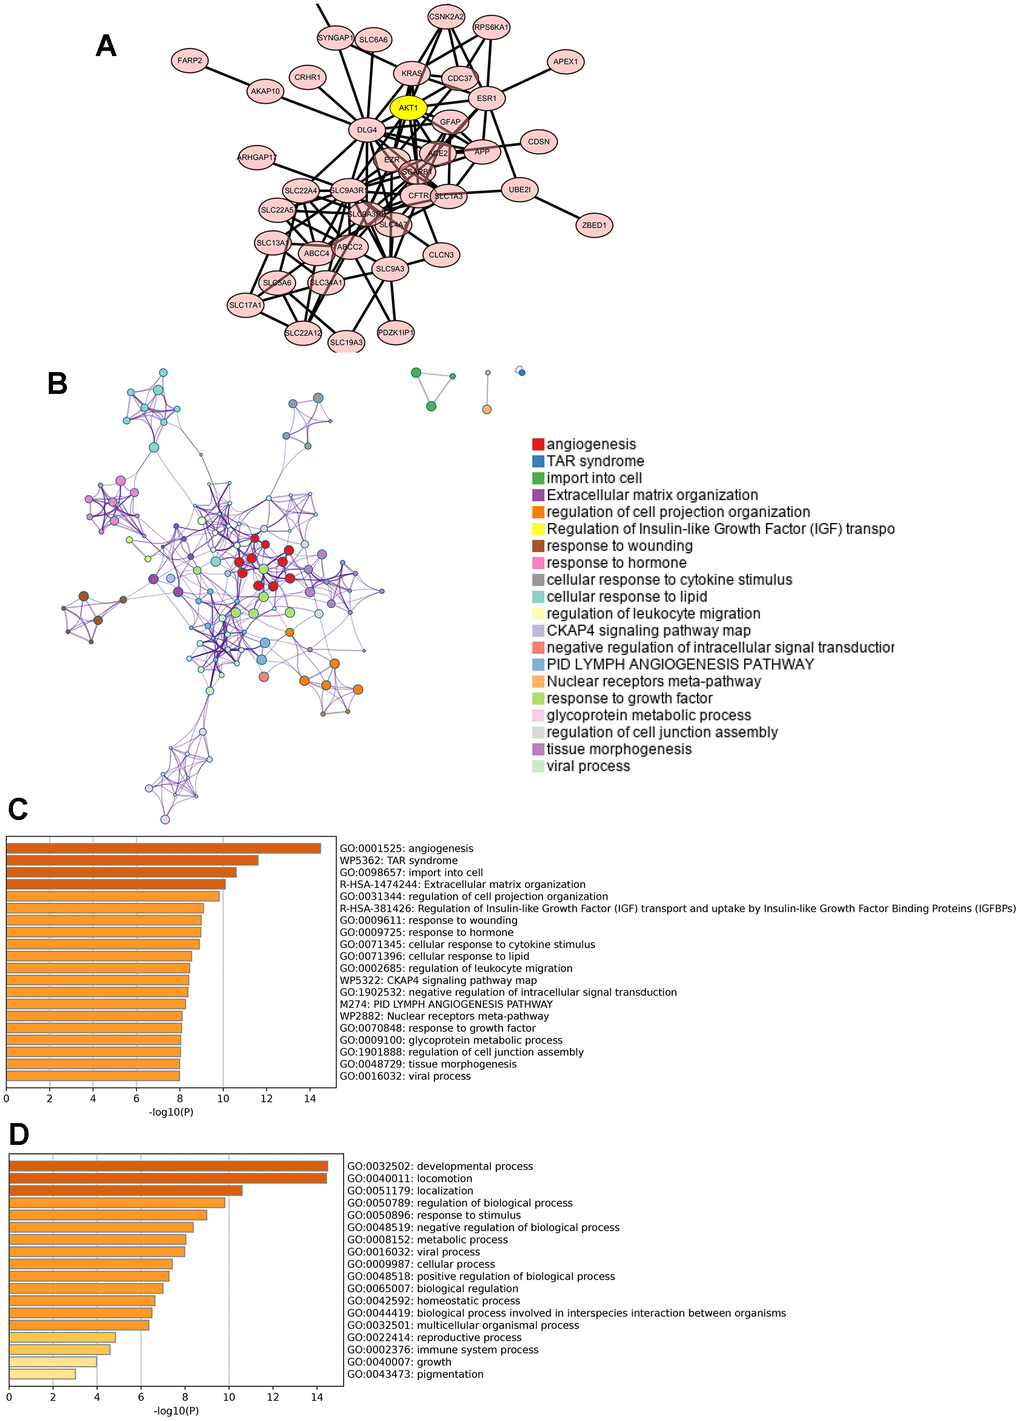 Predicted functions and pathways of PDZK1-associated coexpressed genes in glioma. (A) The PPI network was generated from the PDZK1-associated coexpressed genes, which were constructed using the Cytoscape database. (B–D) GO functional enrichment analysis and KEGG pathway analysis of PDZK1-associated coexpressed genes were conducted using the Metascape database.